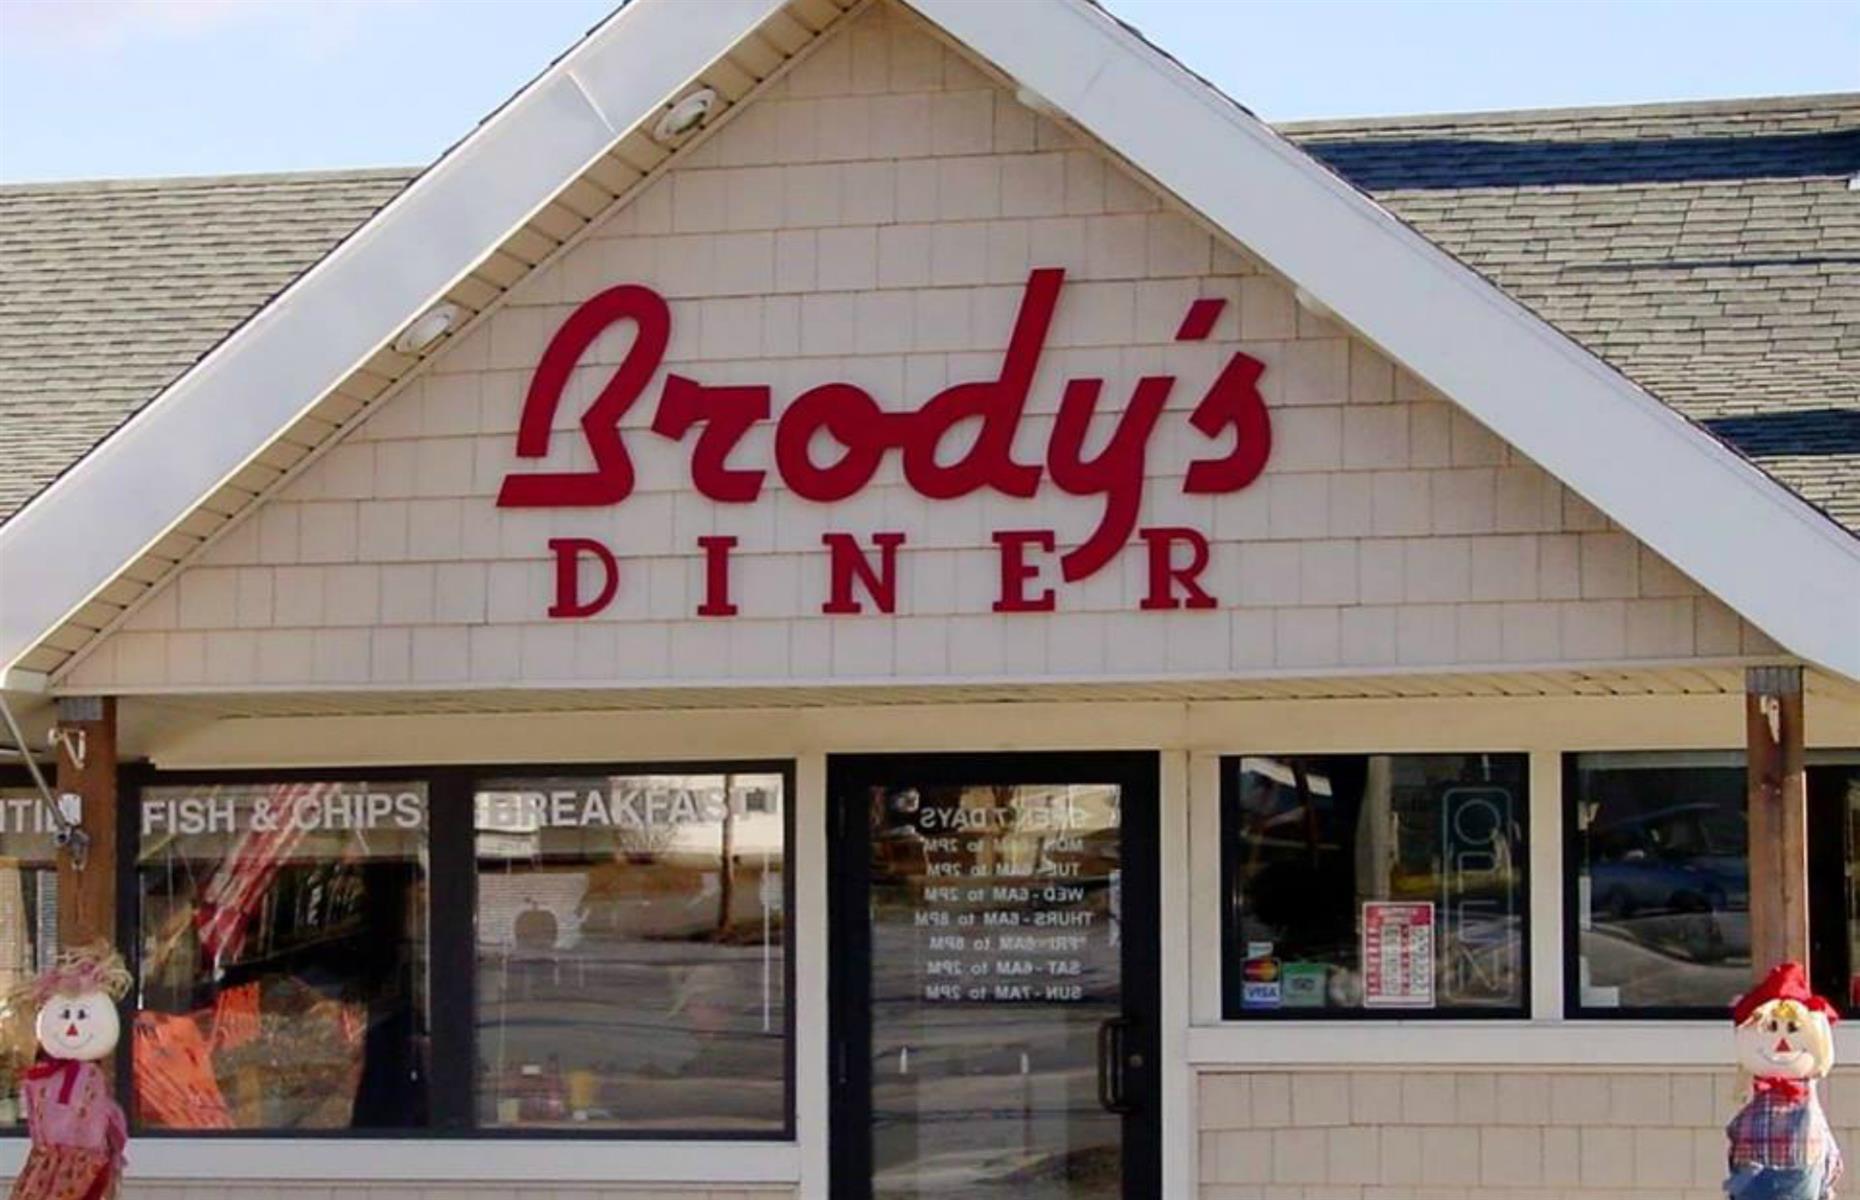 <p>Brody’s Diner is an unpretentious dining spot offering humongous stacks of buttermilk pancakes and chunky ham, pepper and onion omelets. Customers always comment on <a href="https://www.facebook.com/pg/Brodys-Diner-115620095125634/reviews/?ref=page_internal">the portion sizes</a>. Comedian Jerry Seinfeld even reportedly <a href="https://www.bostonglobe.com/lifestyle/names/2014/07/16/jerry-seinfeld-reviews-shrewsbury-diner/q1B7LWQUXhMBv6IrLfudLM/story.html">wrote a Yelp review</a> describing the coffee mugs as “big enough to wash your feet in”.</p>